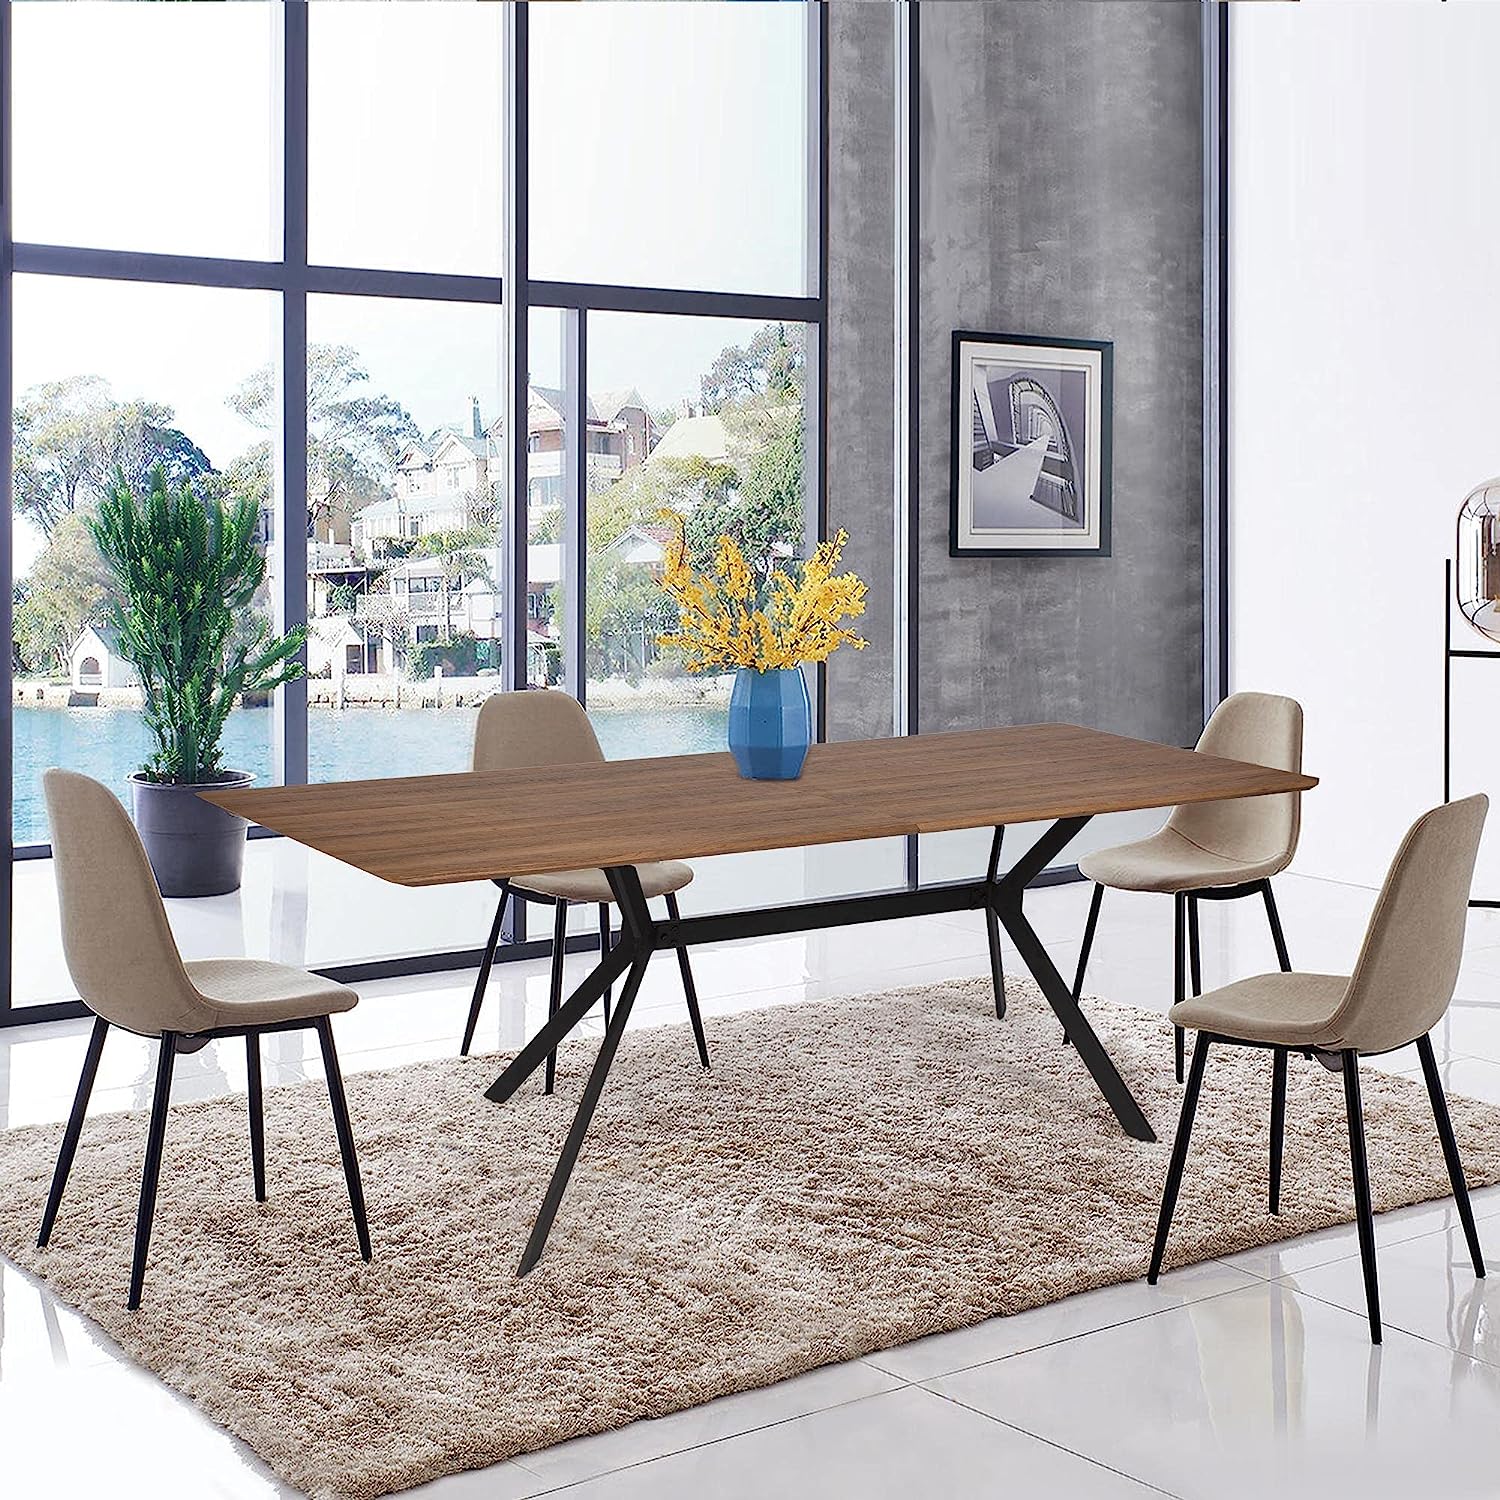 71"x 35.5" Rectangle Mid-Century Modern Wooden Dining Table for 6-8 Kitchen Table with Metal Legs